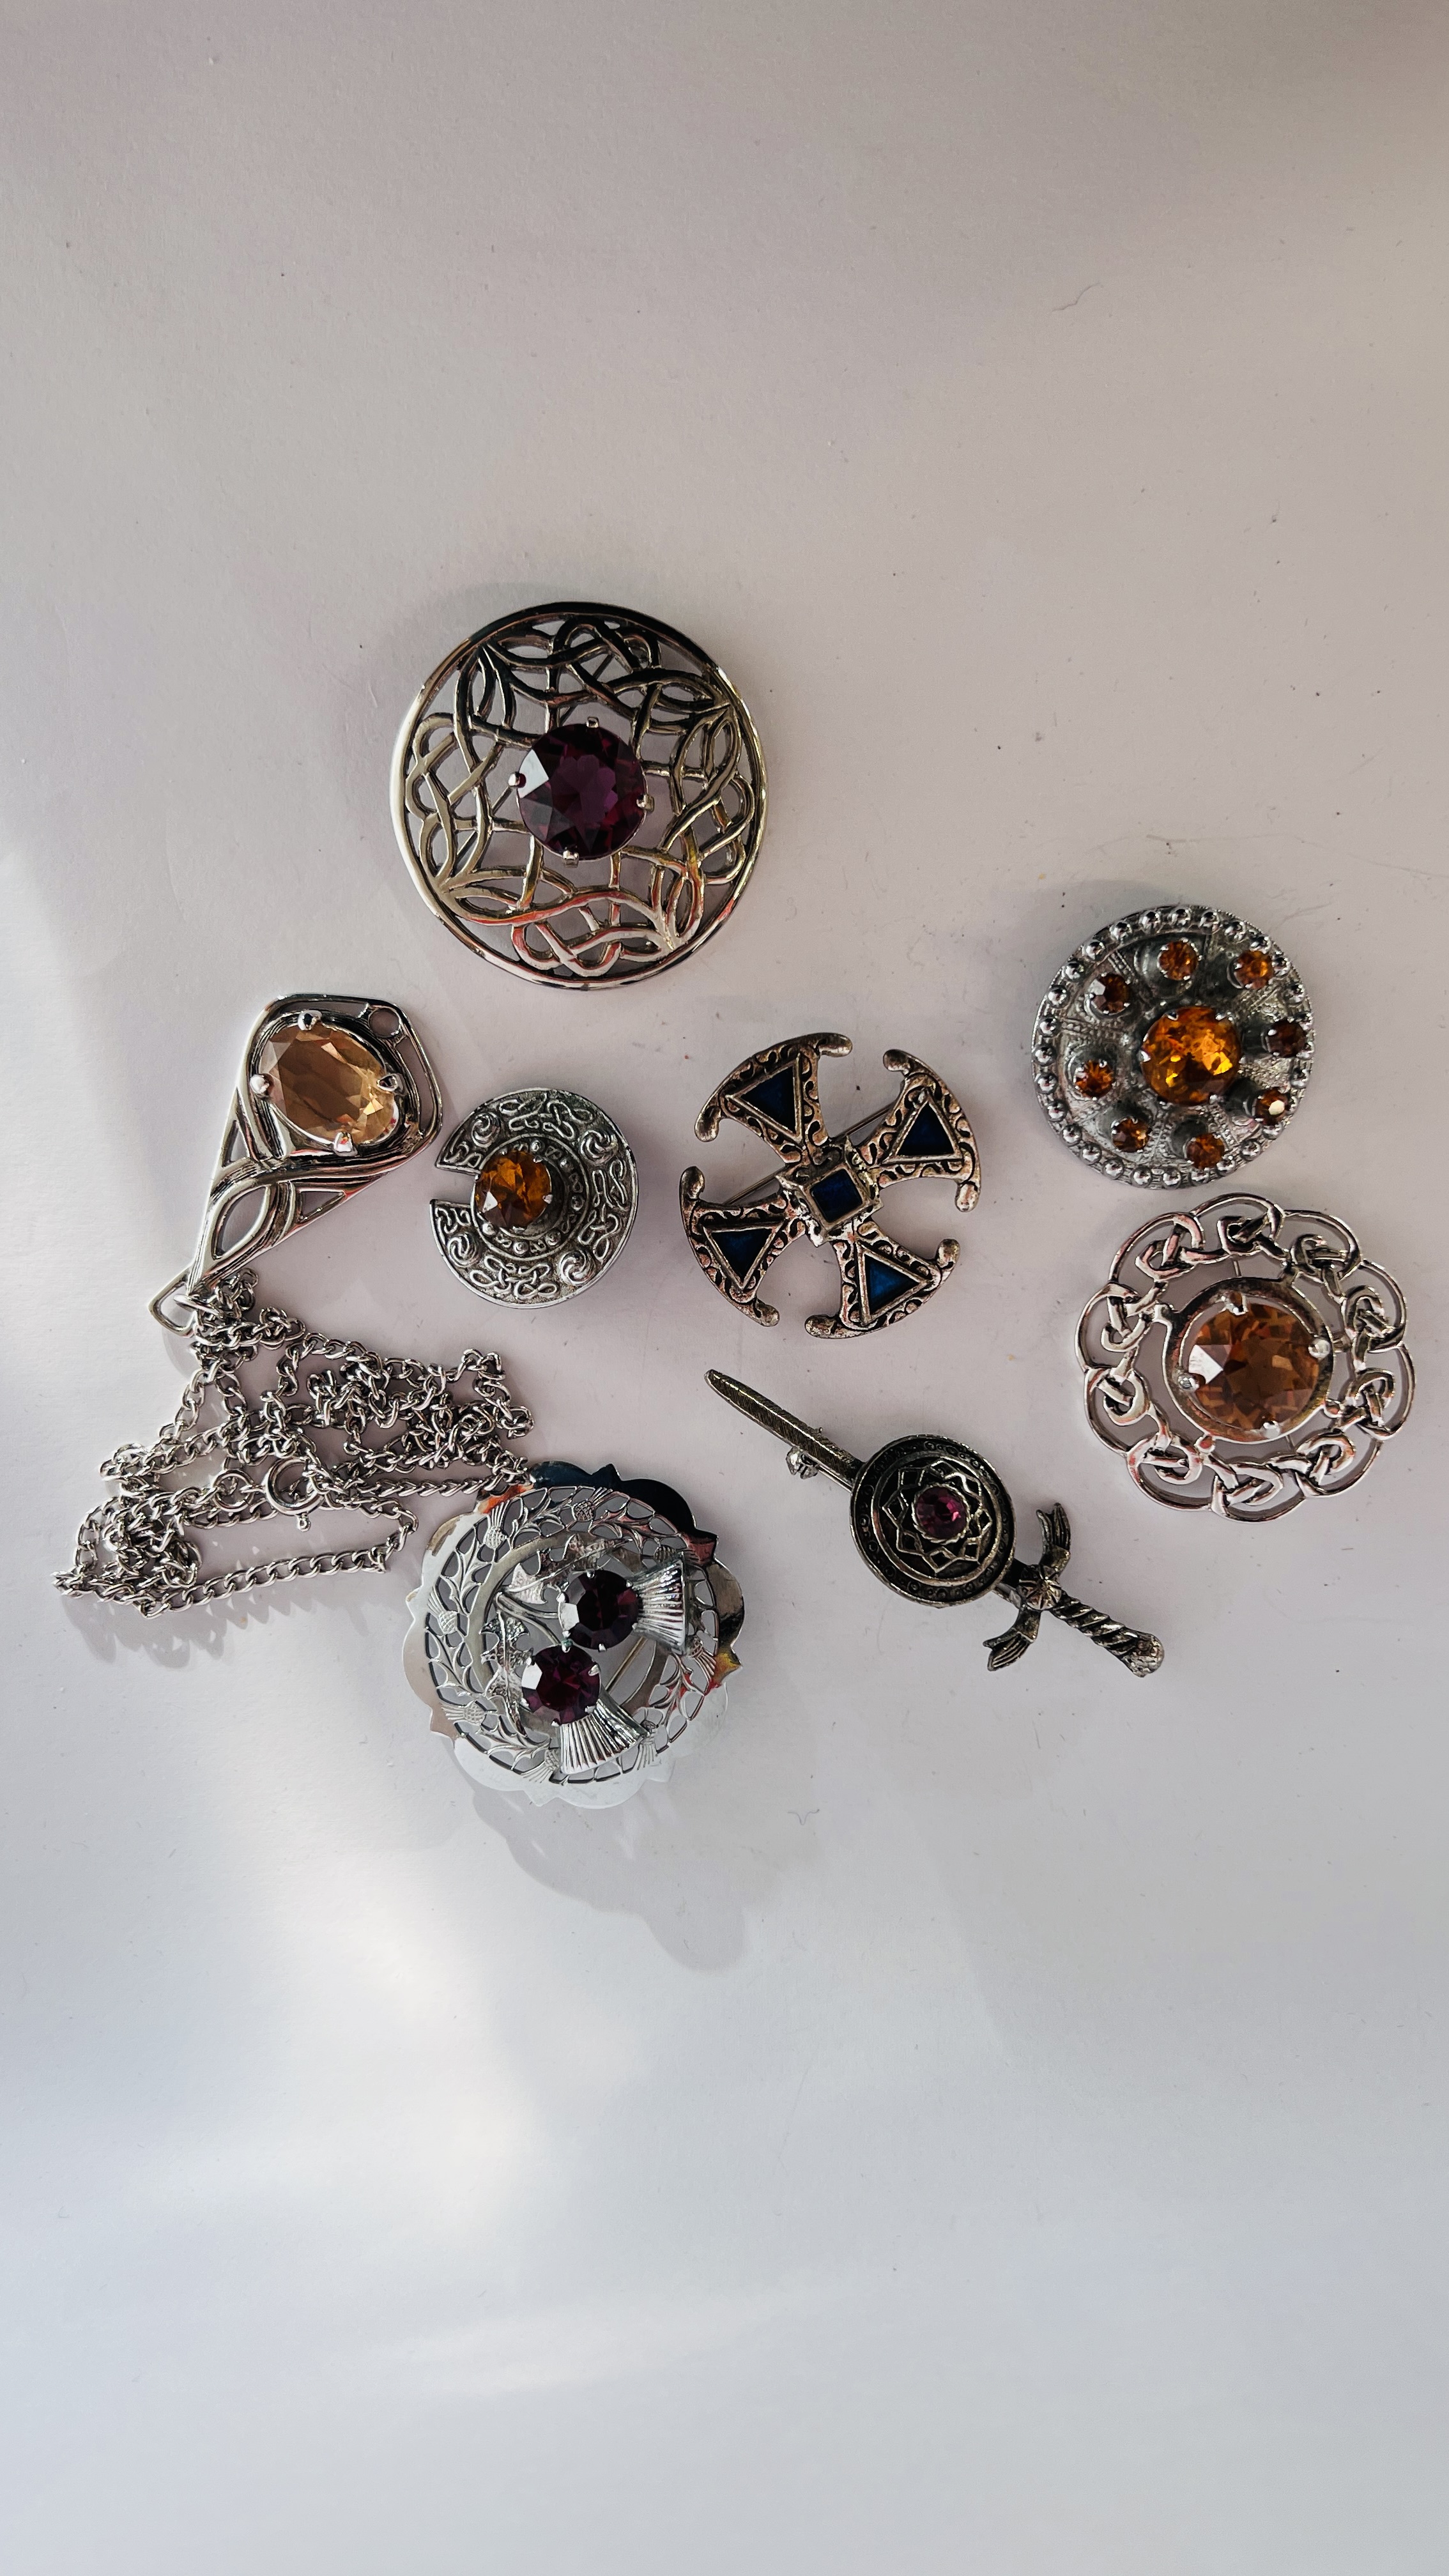 SELECTION OF SEVEN "MIZPAH" & "MIRACLE" SCOTTISH AND CELTIC GLASS BROOCHES AND NECKLACE